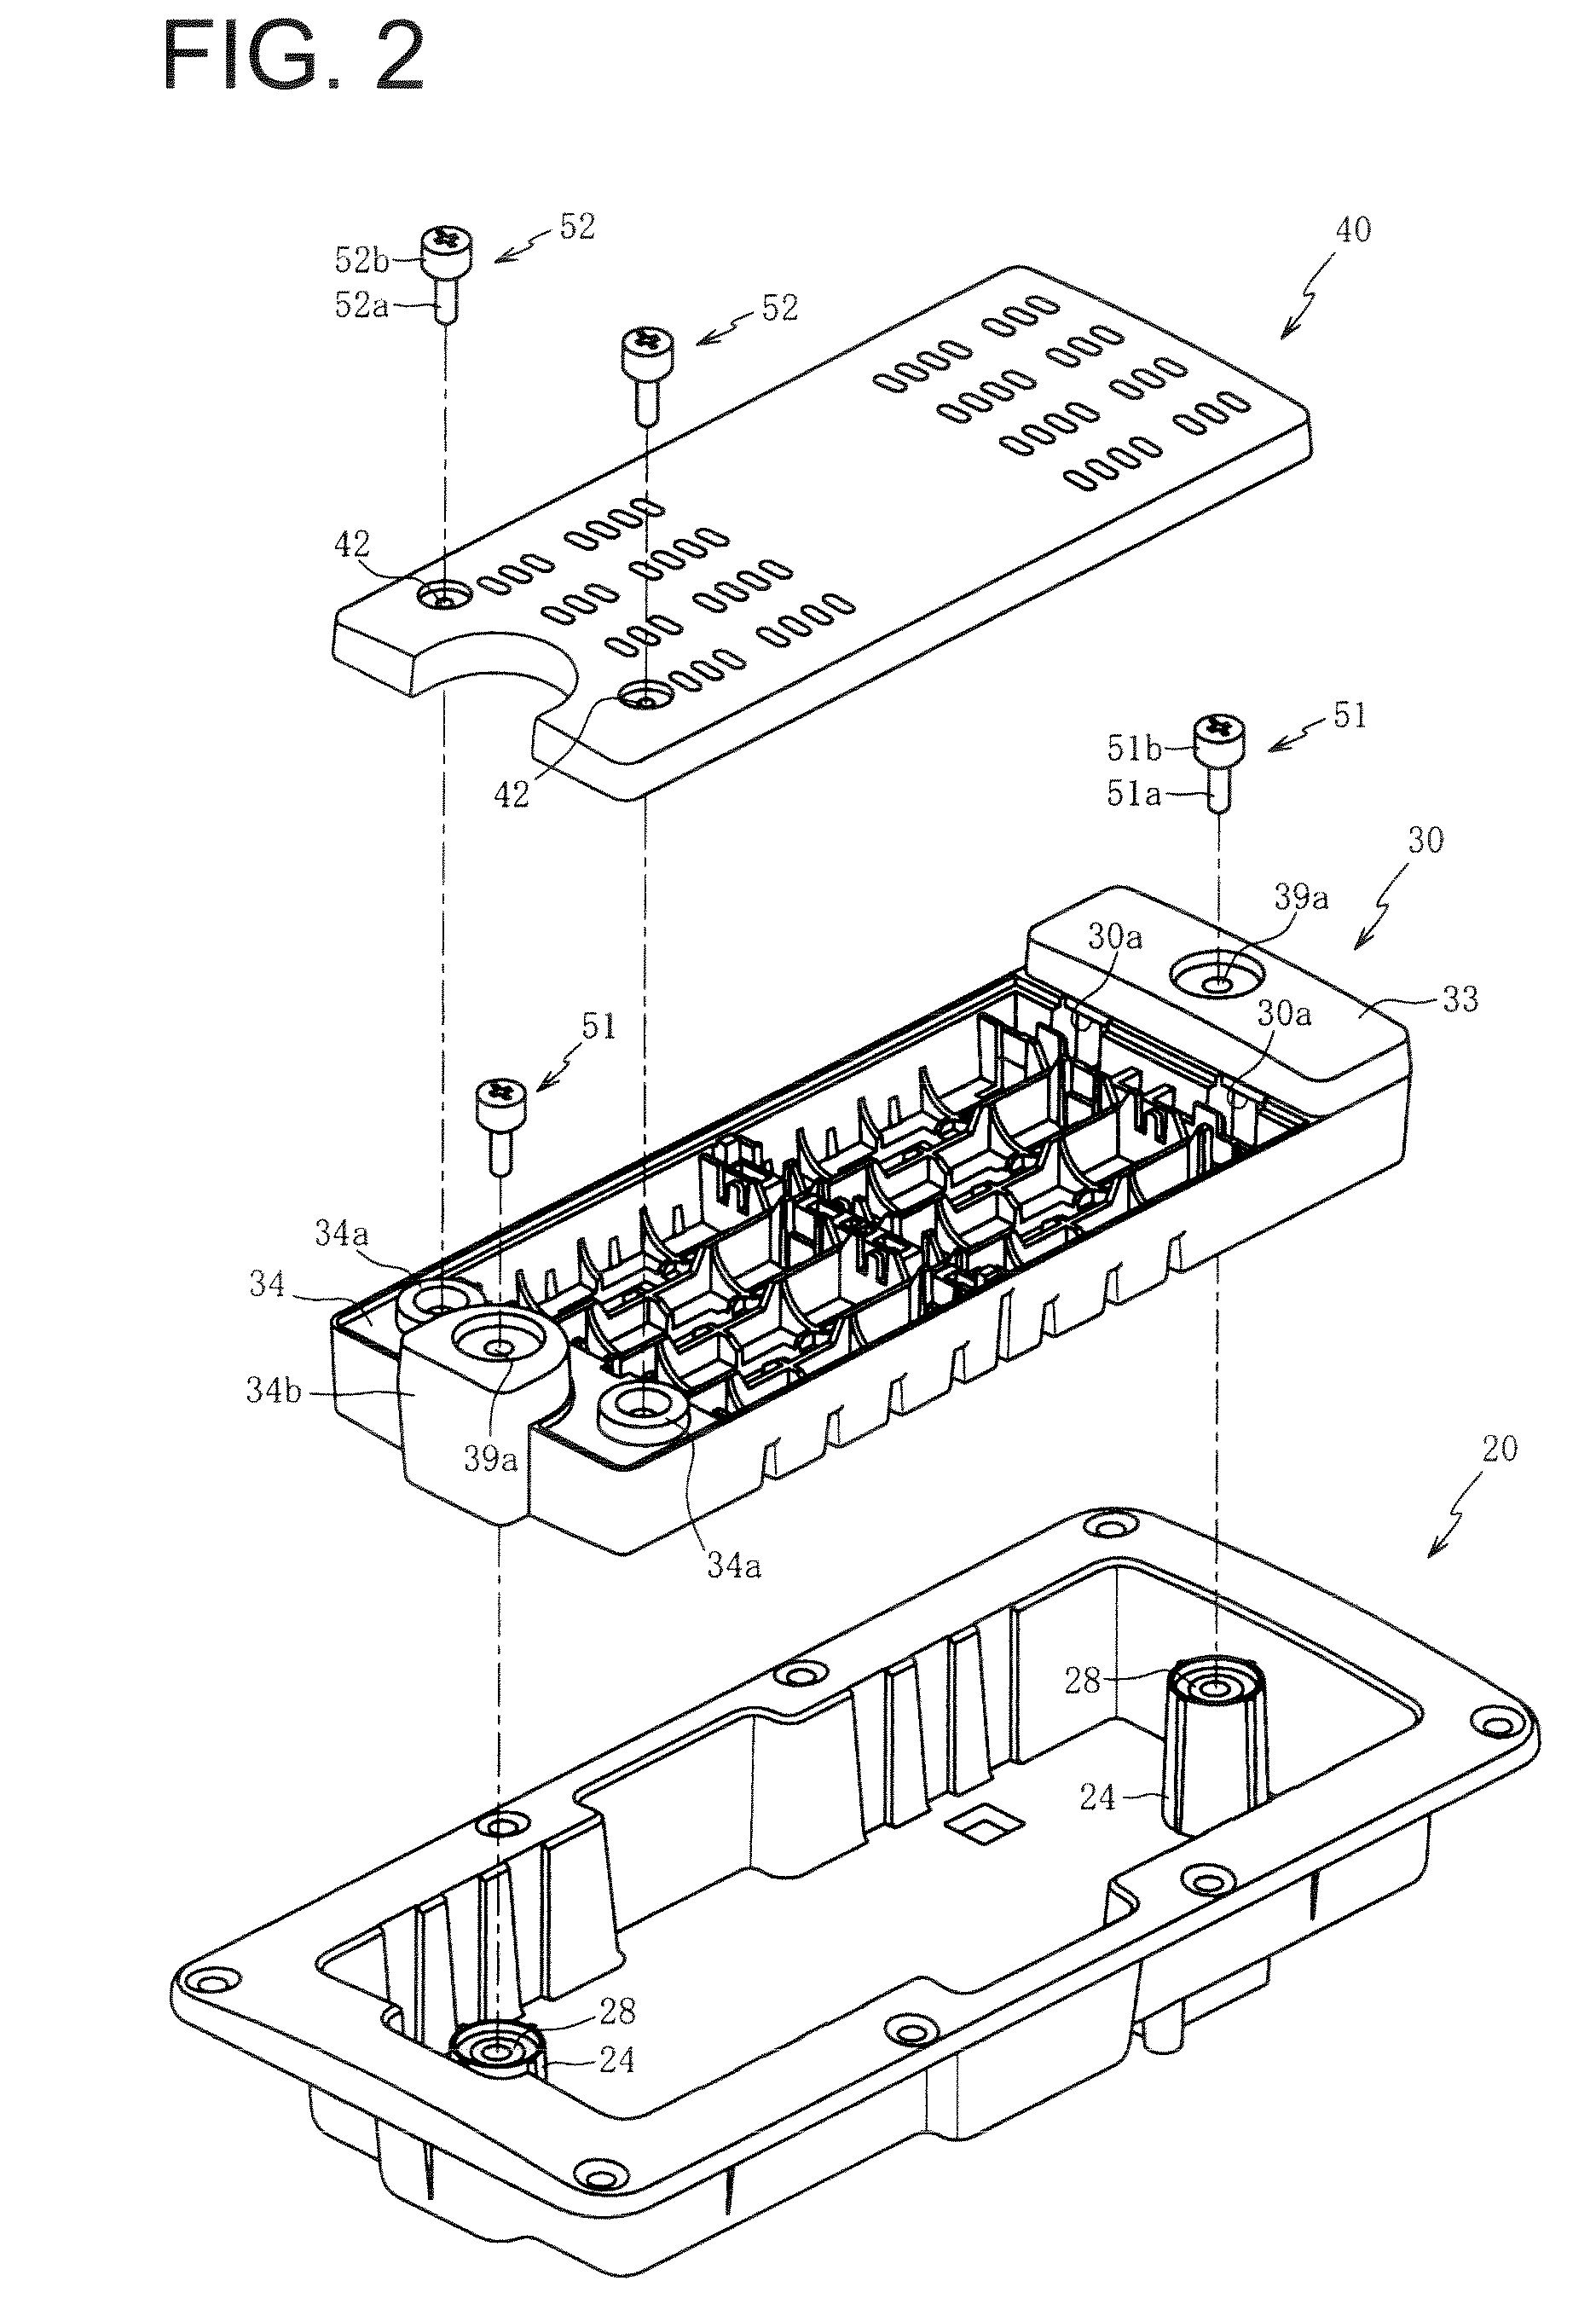 Battery storage structure for acoustic equipment